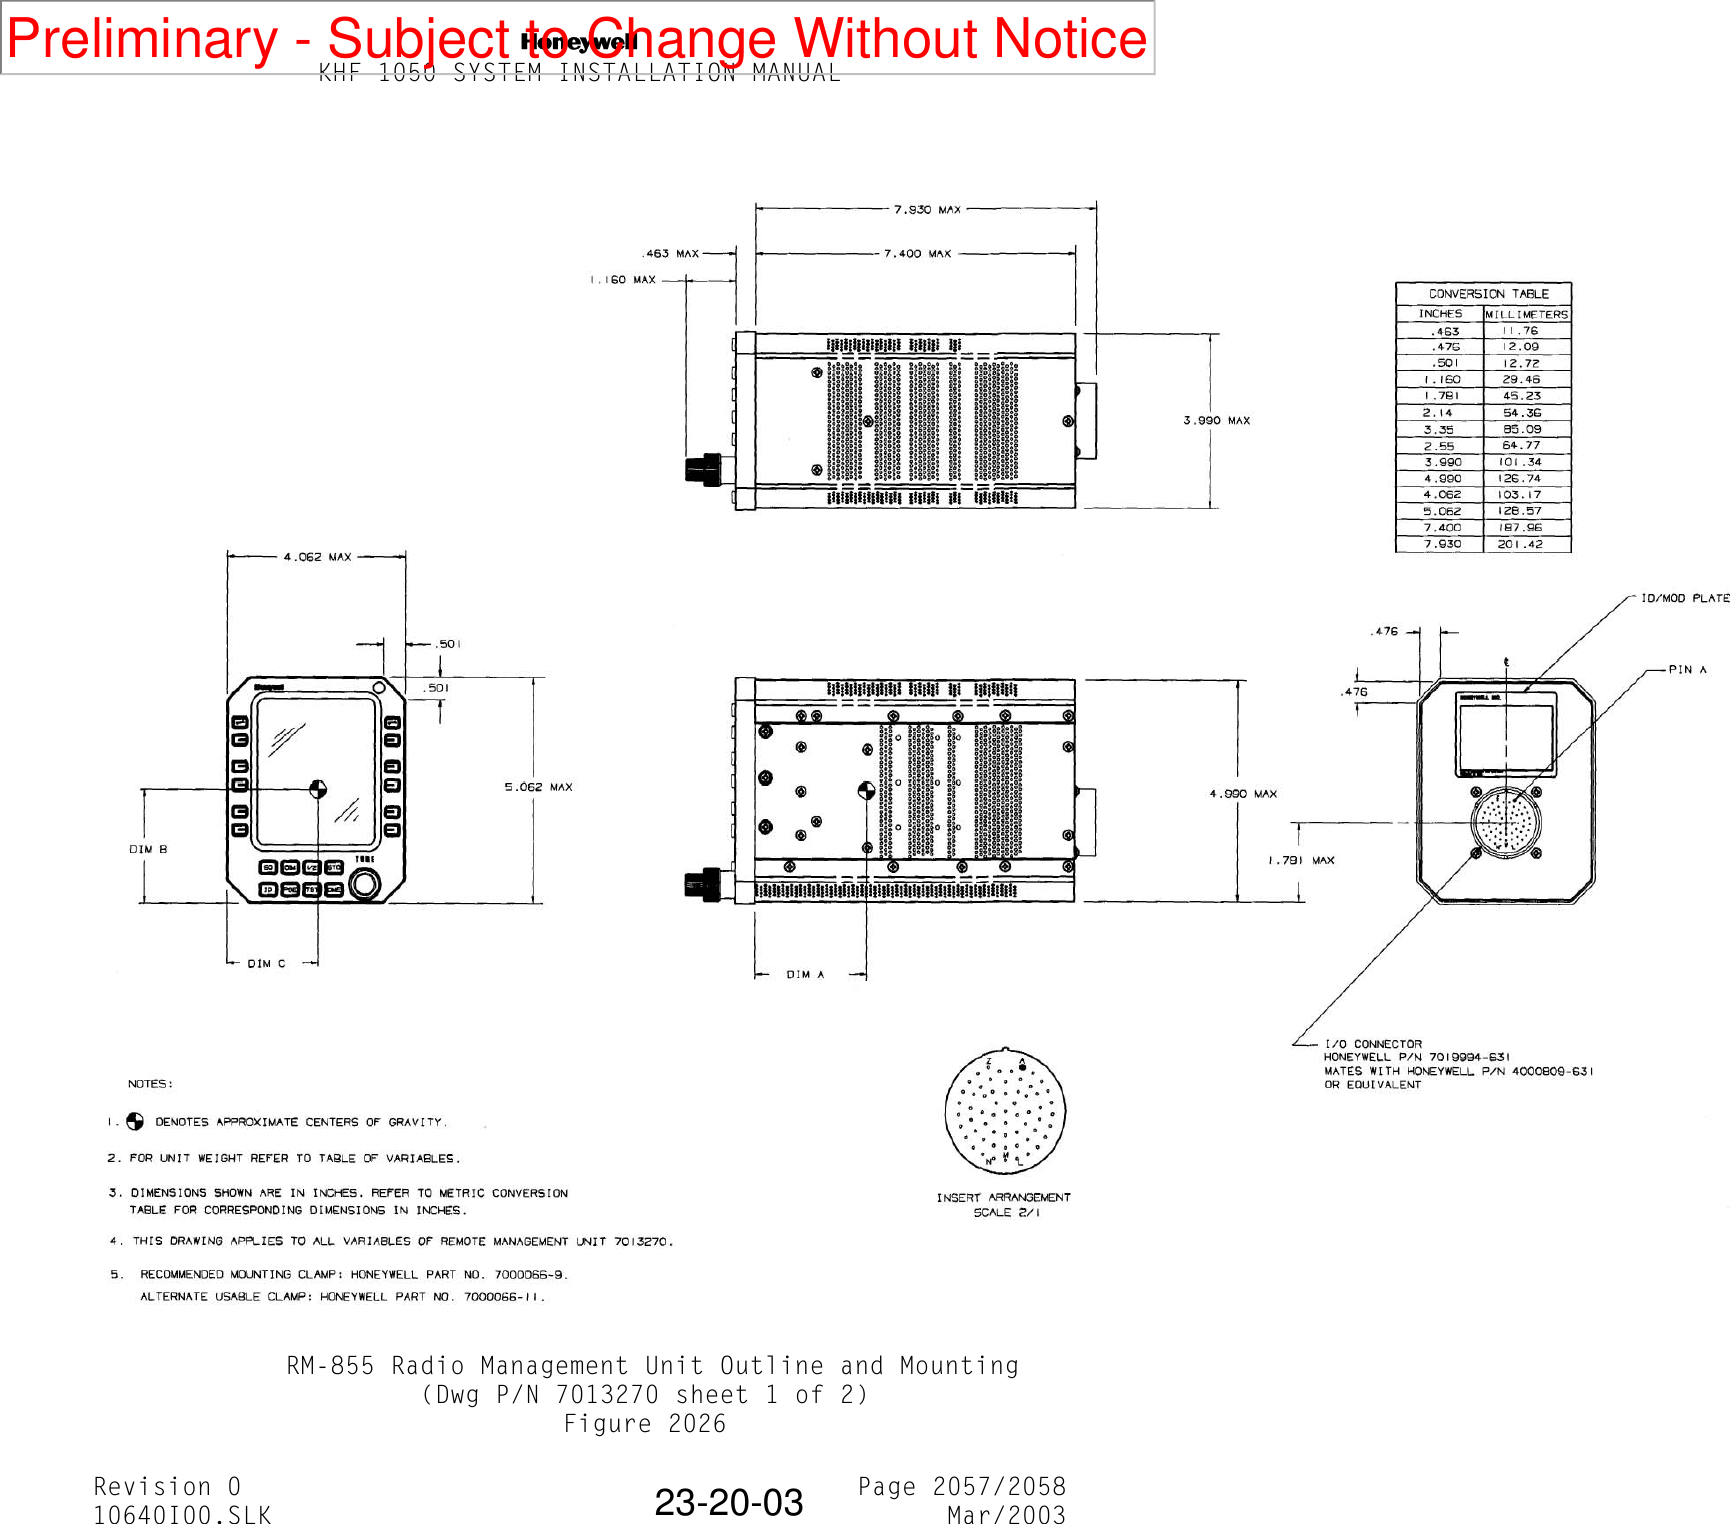 NKHF 1050 SYSTEM INSTALLATION MANUALRevision 0 Page 2057/205810640I00.SLK Mar/200323-20-03 RM-855 Radio Management Unit Outline and Mounting(Dwg P/N 7013270 sheet 1 of 2)Figure 2026Preliminary - Subject to Change Without Notice